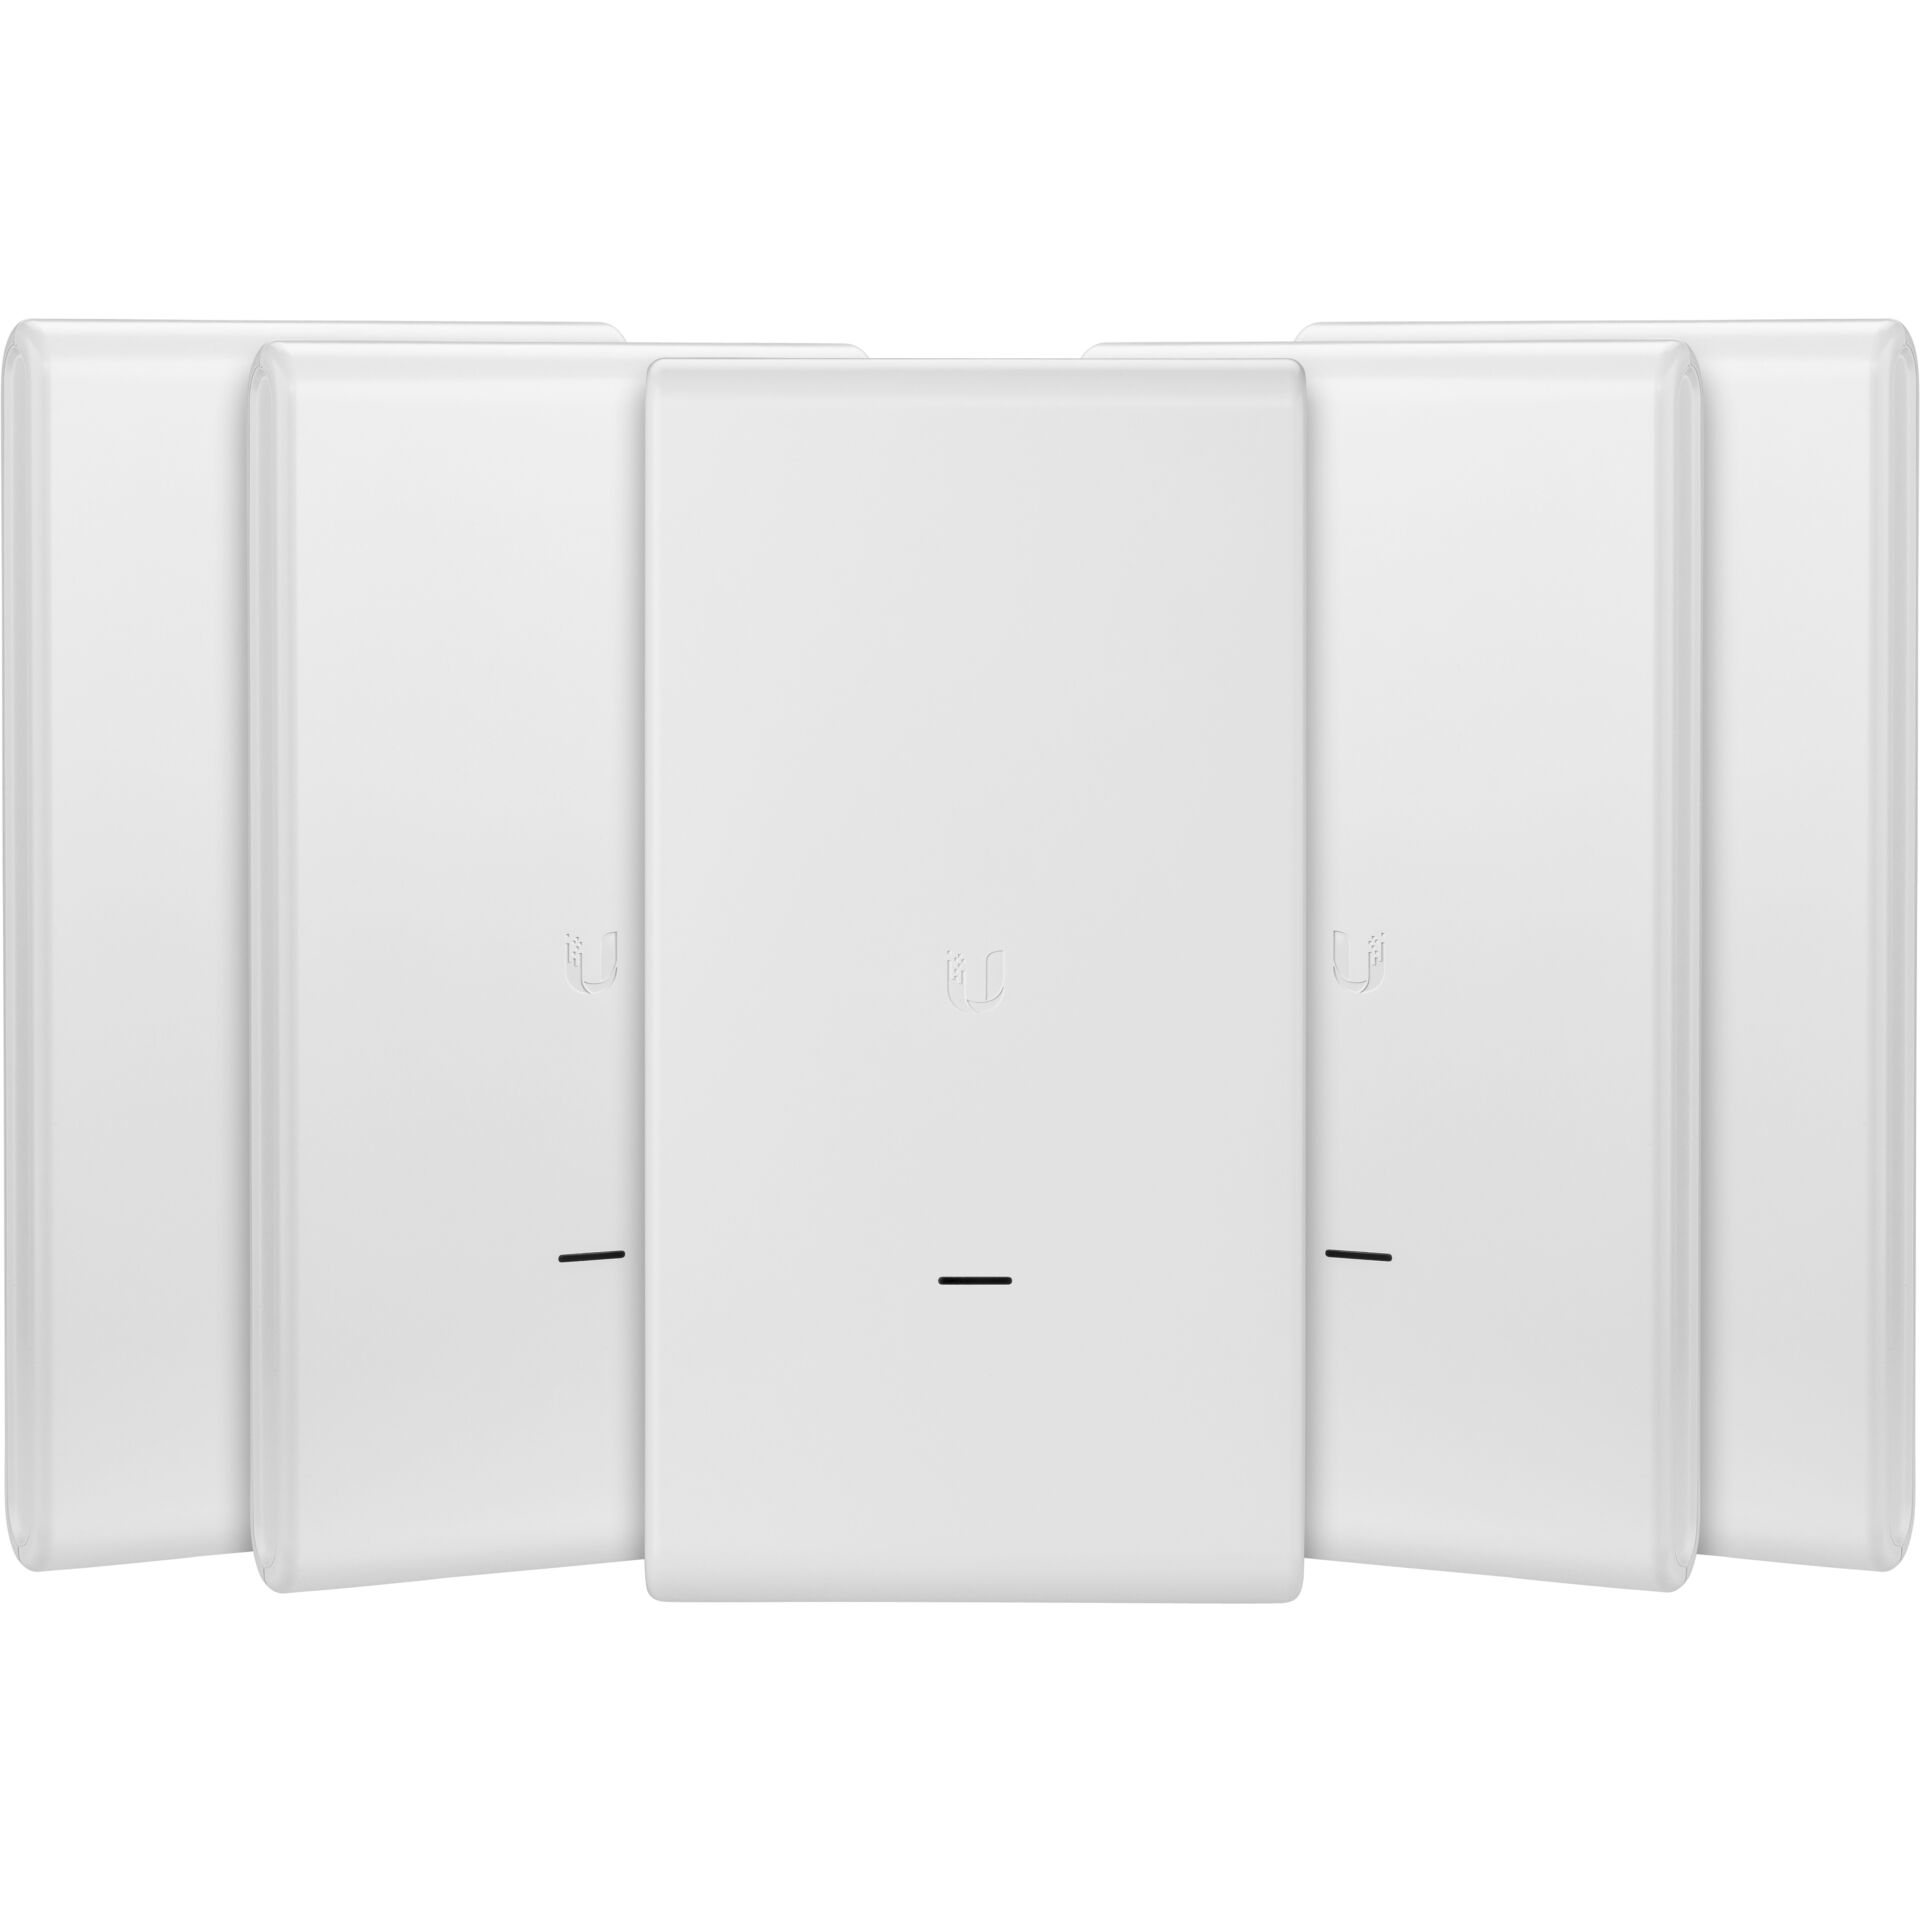 Ubiquiti UniFi AC Mesh Pro 5er-Pack, Wi-Fi 5, 450Mbps (2.4GHz), 1300Mbps (5GHz), Outdoor Access Point